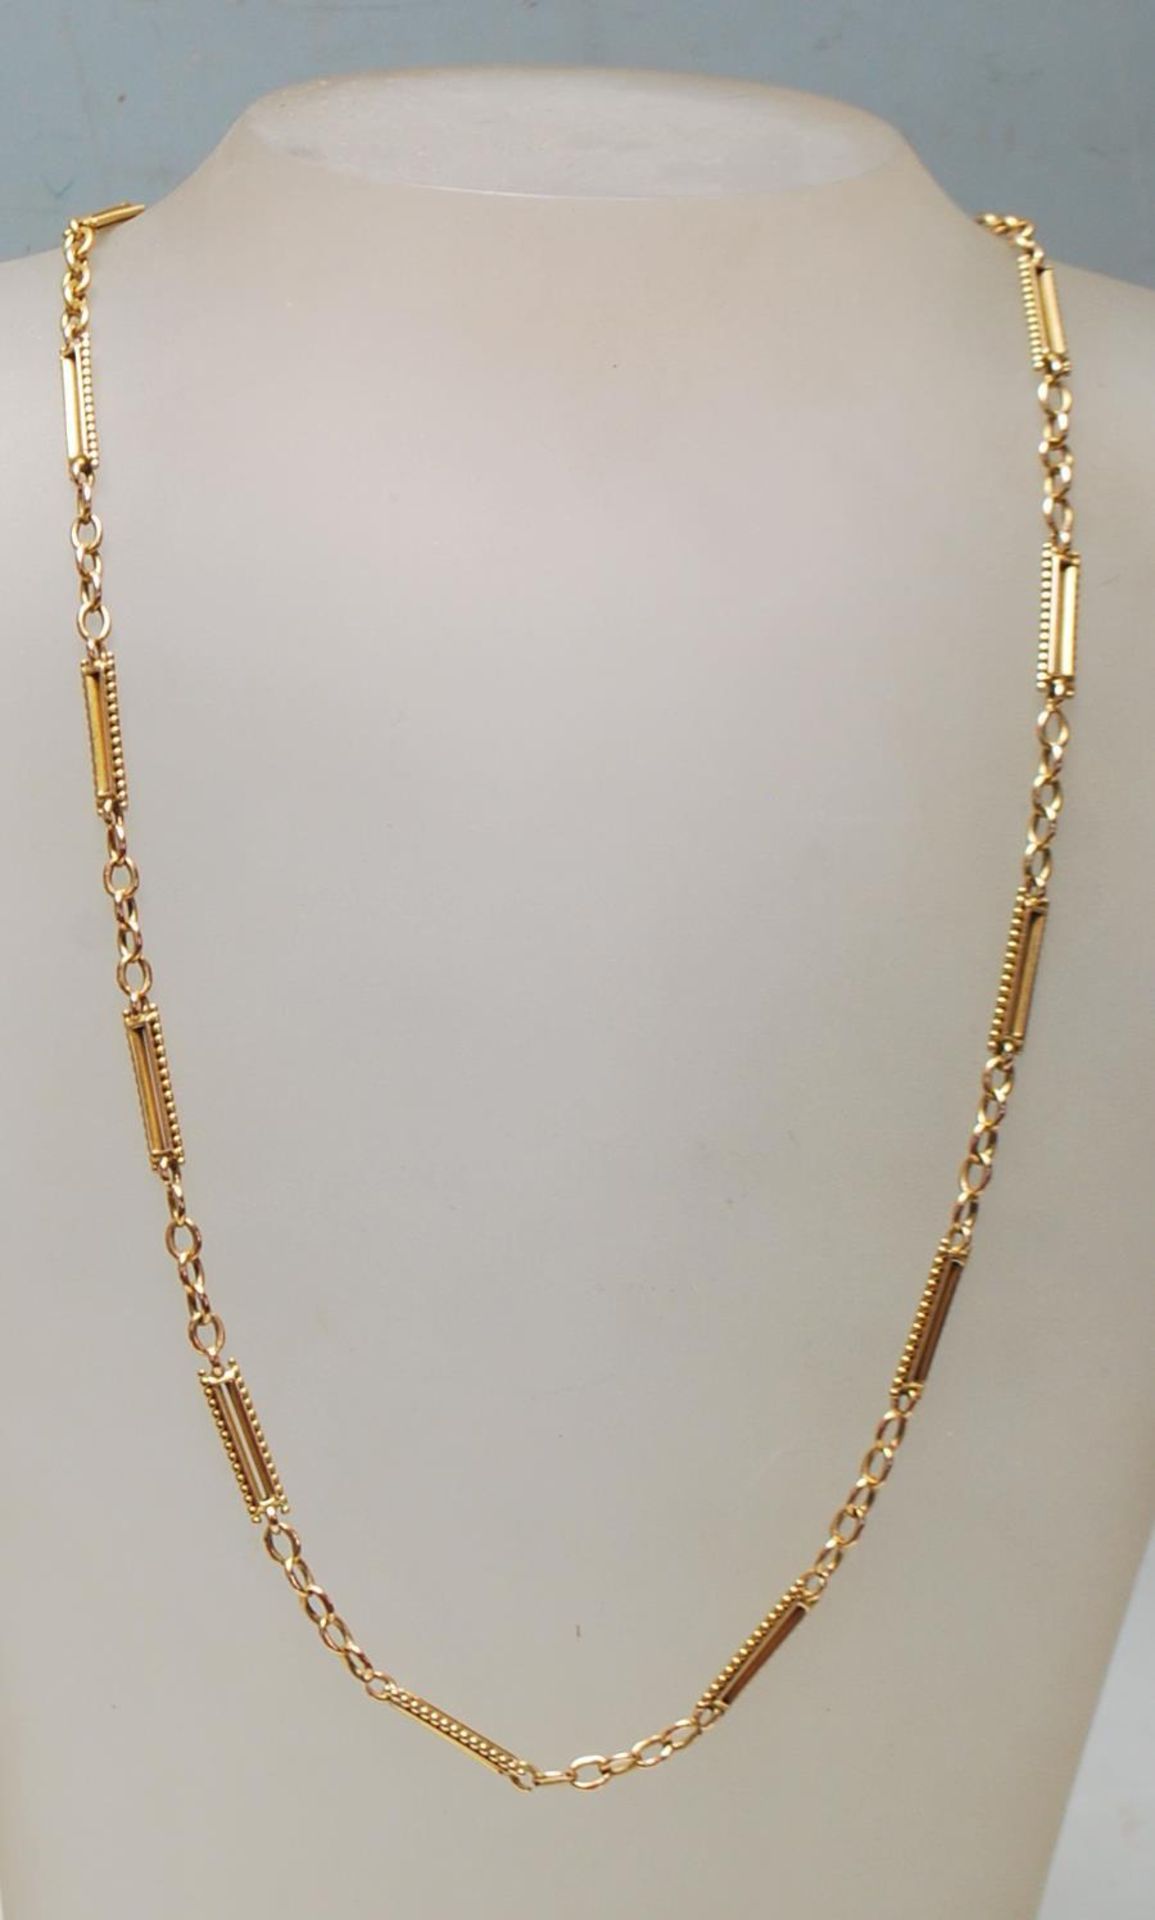 15CT GOLD BAR LINK POCKET WATCH CHAIN - Image 6 of 6